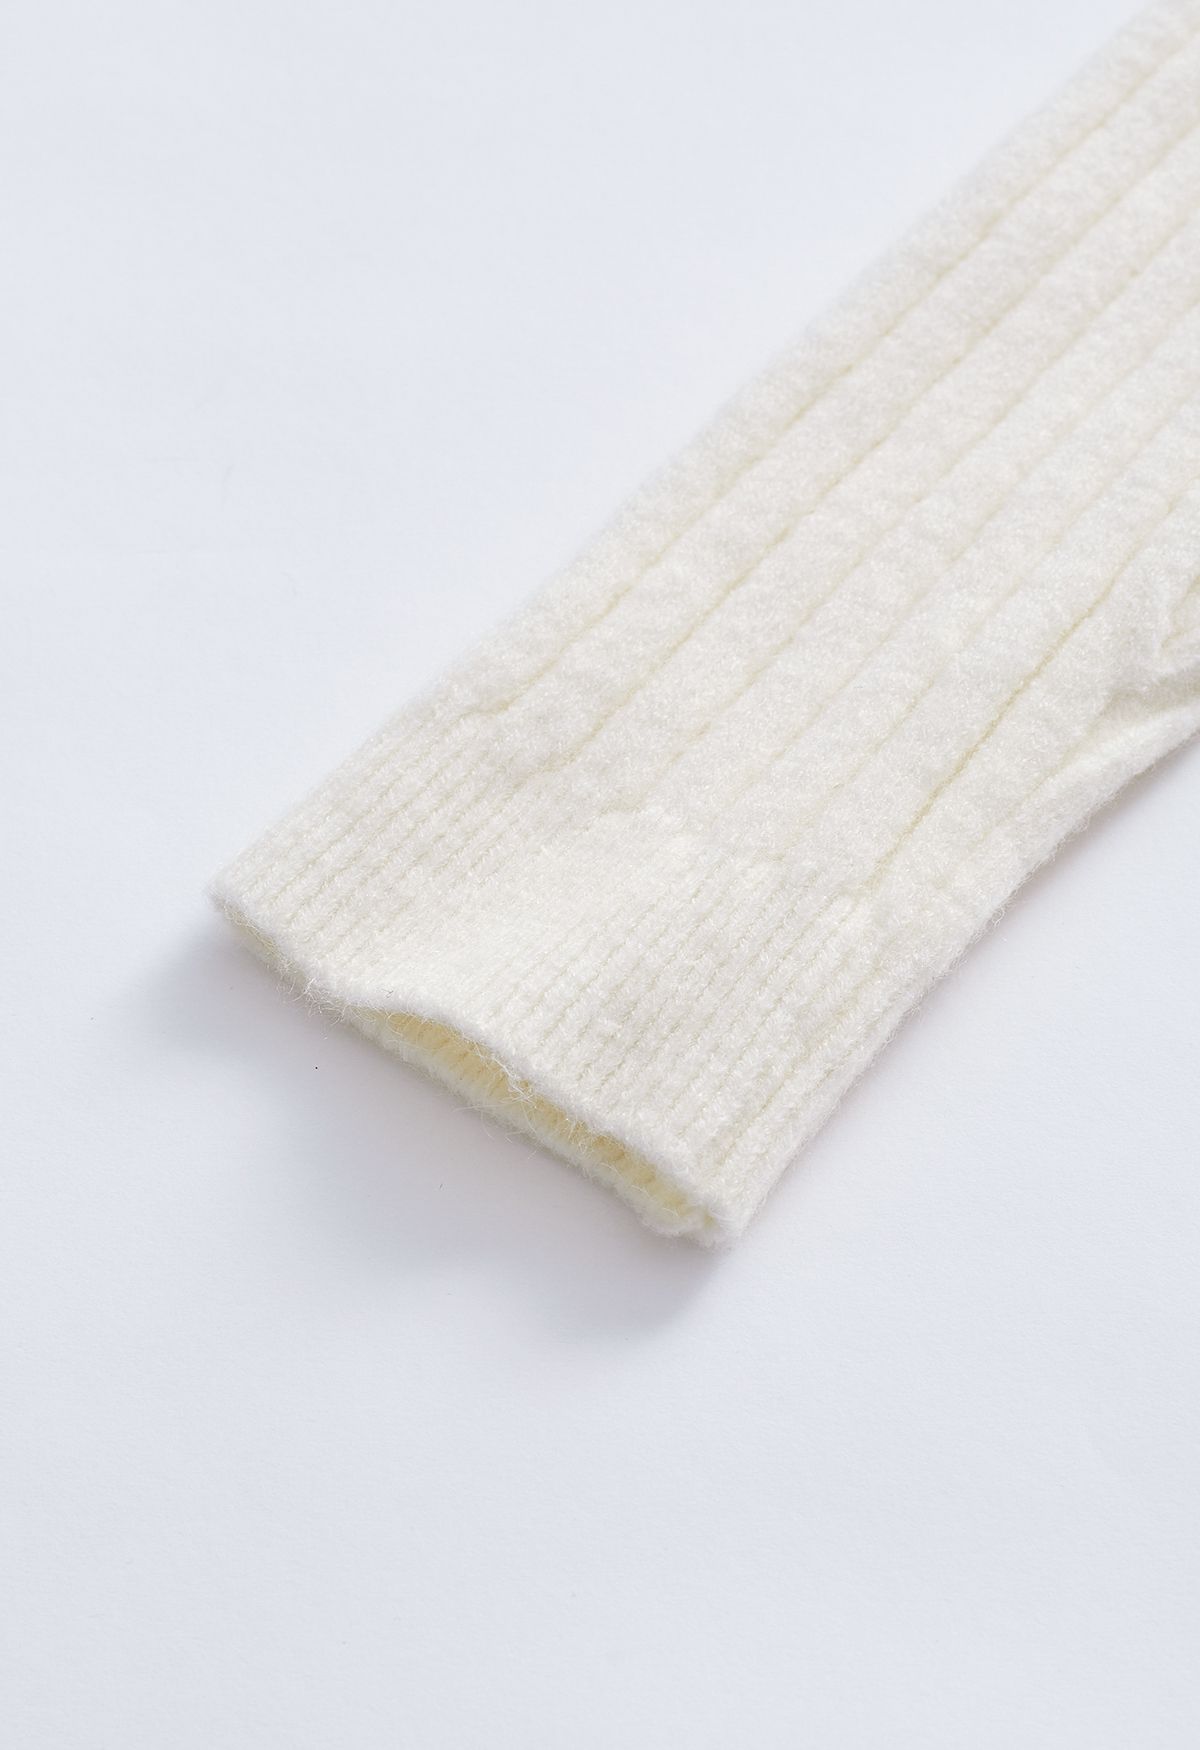 Turtleneck Sleeves Knit Sweater in White